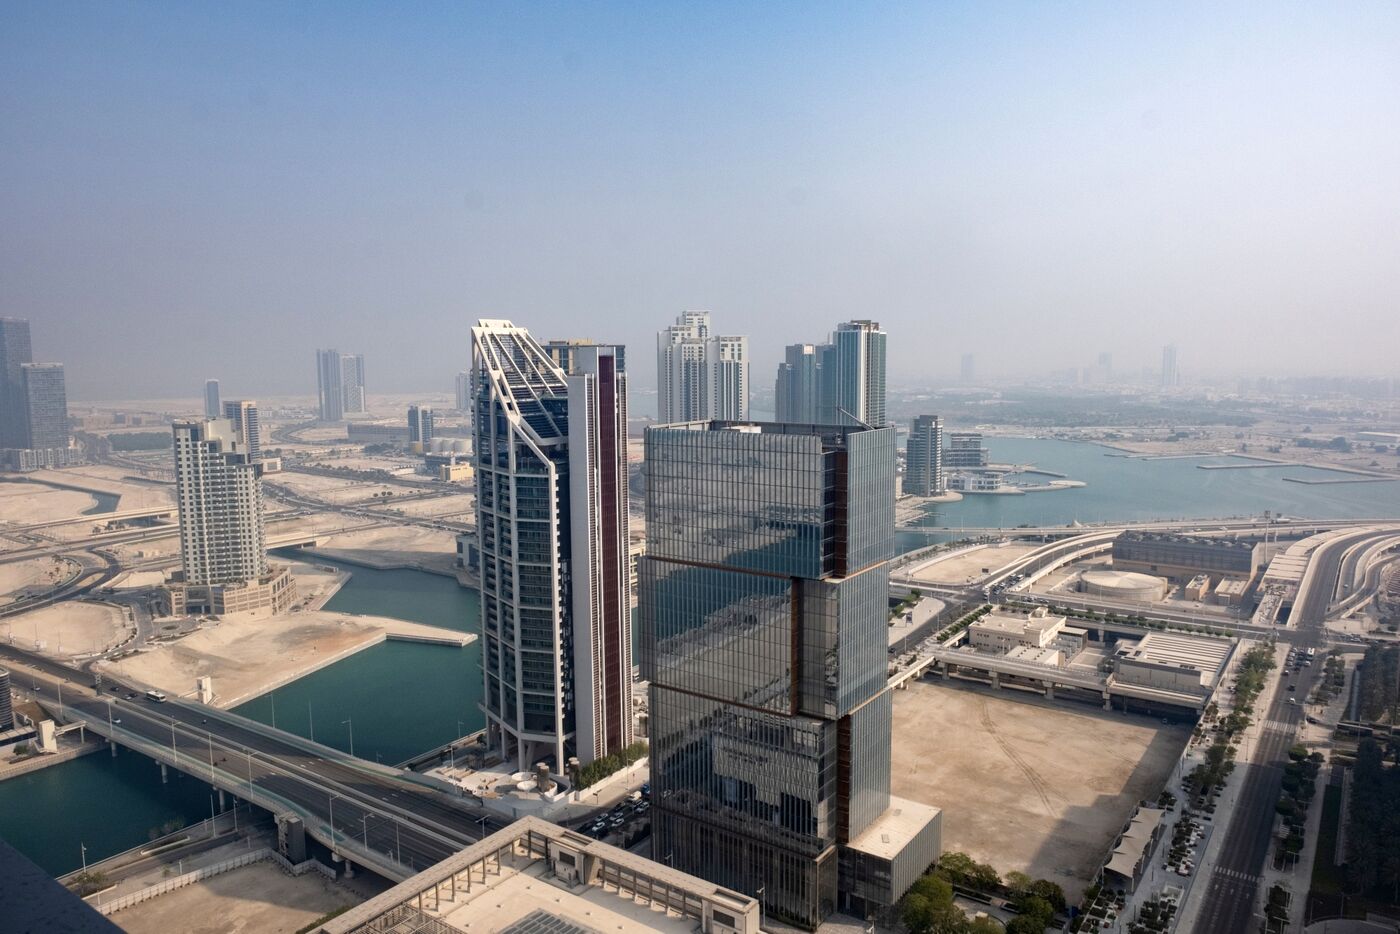 Abu Dhabi Is the World’s Newest Wealth Haven for Billionaires